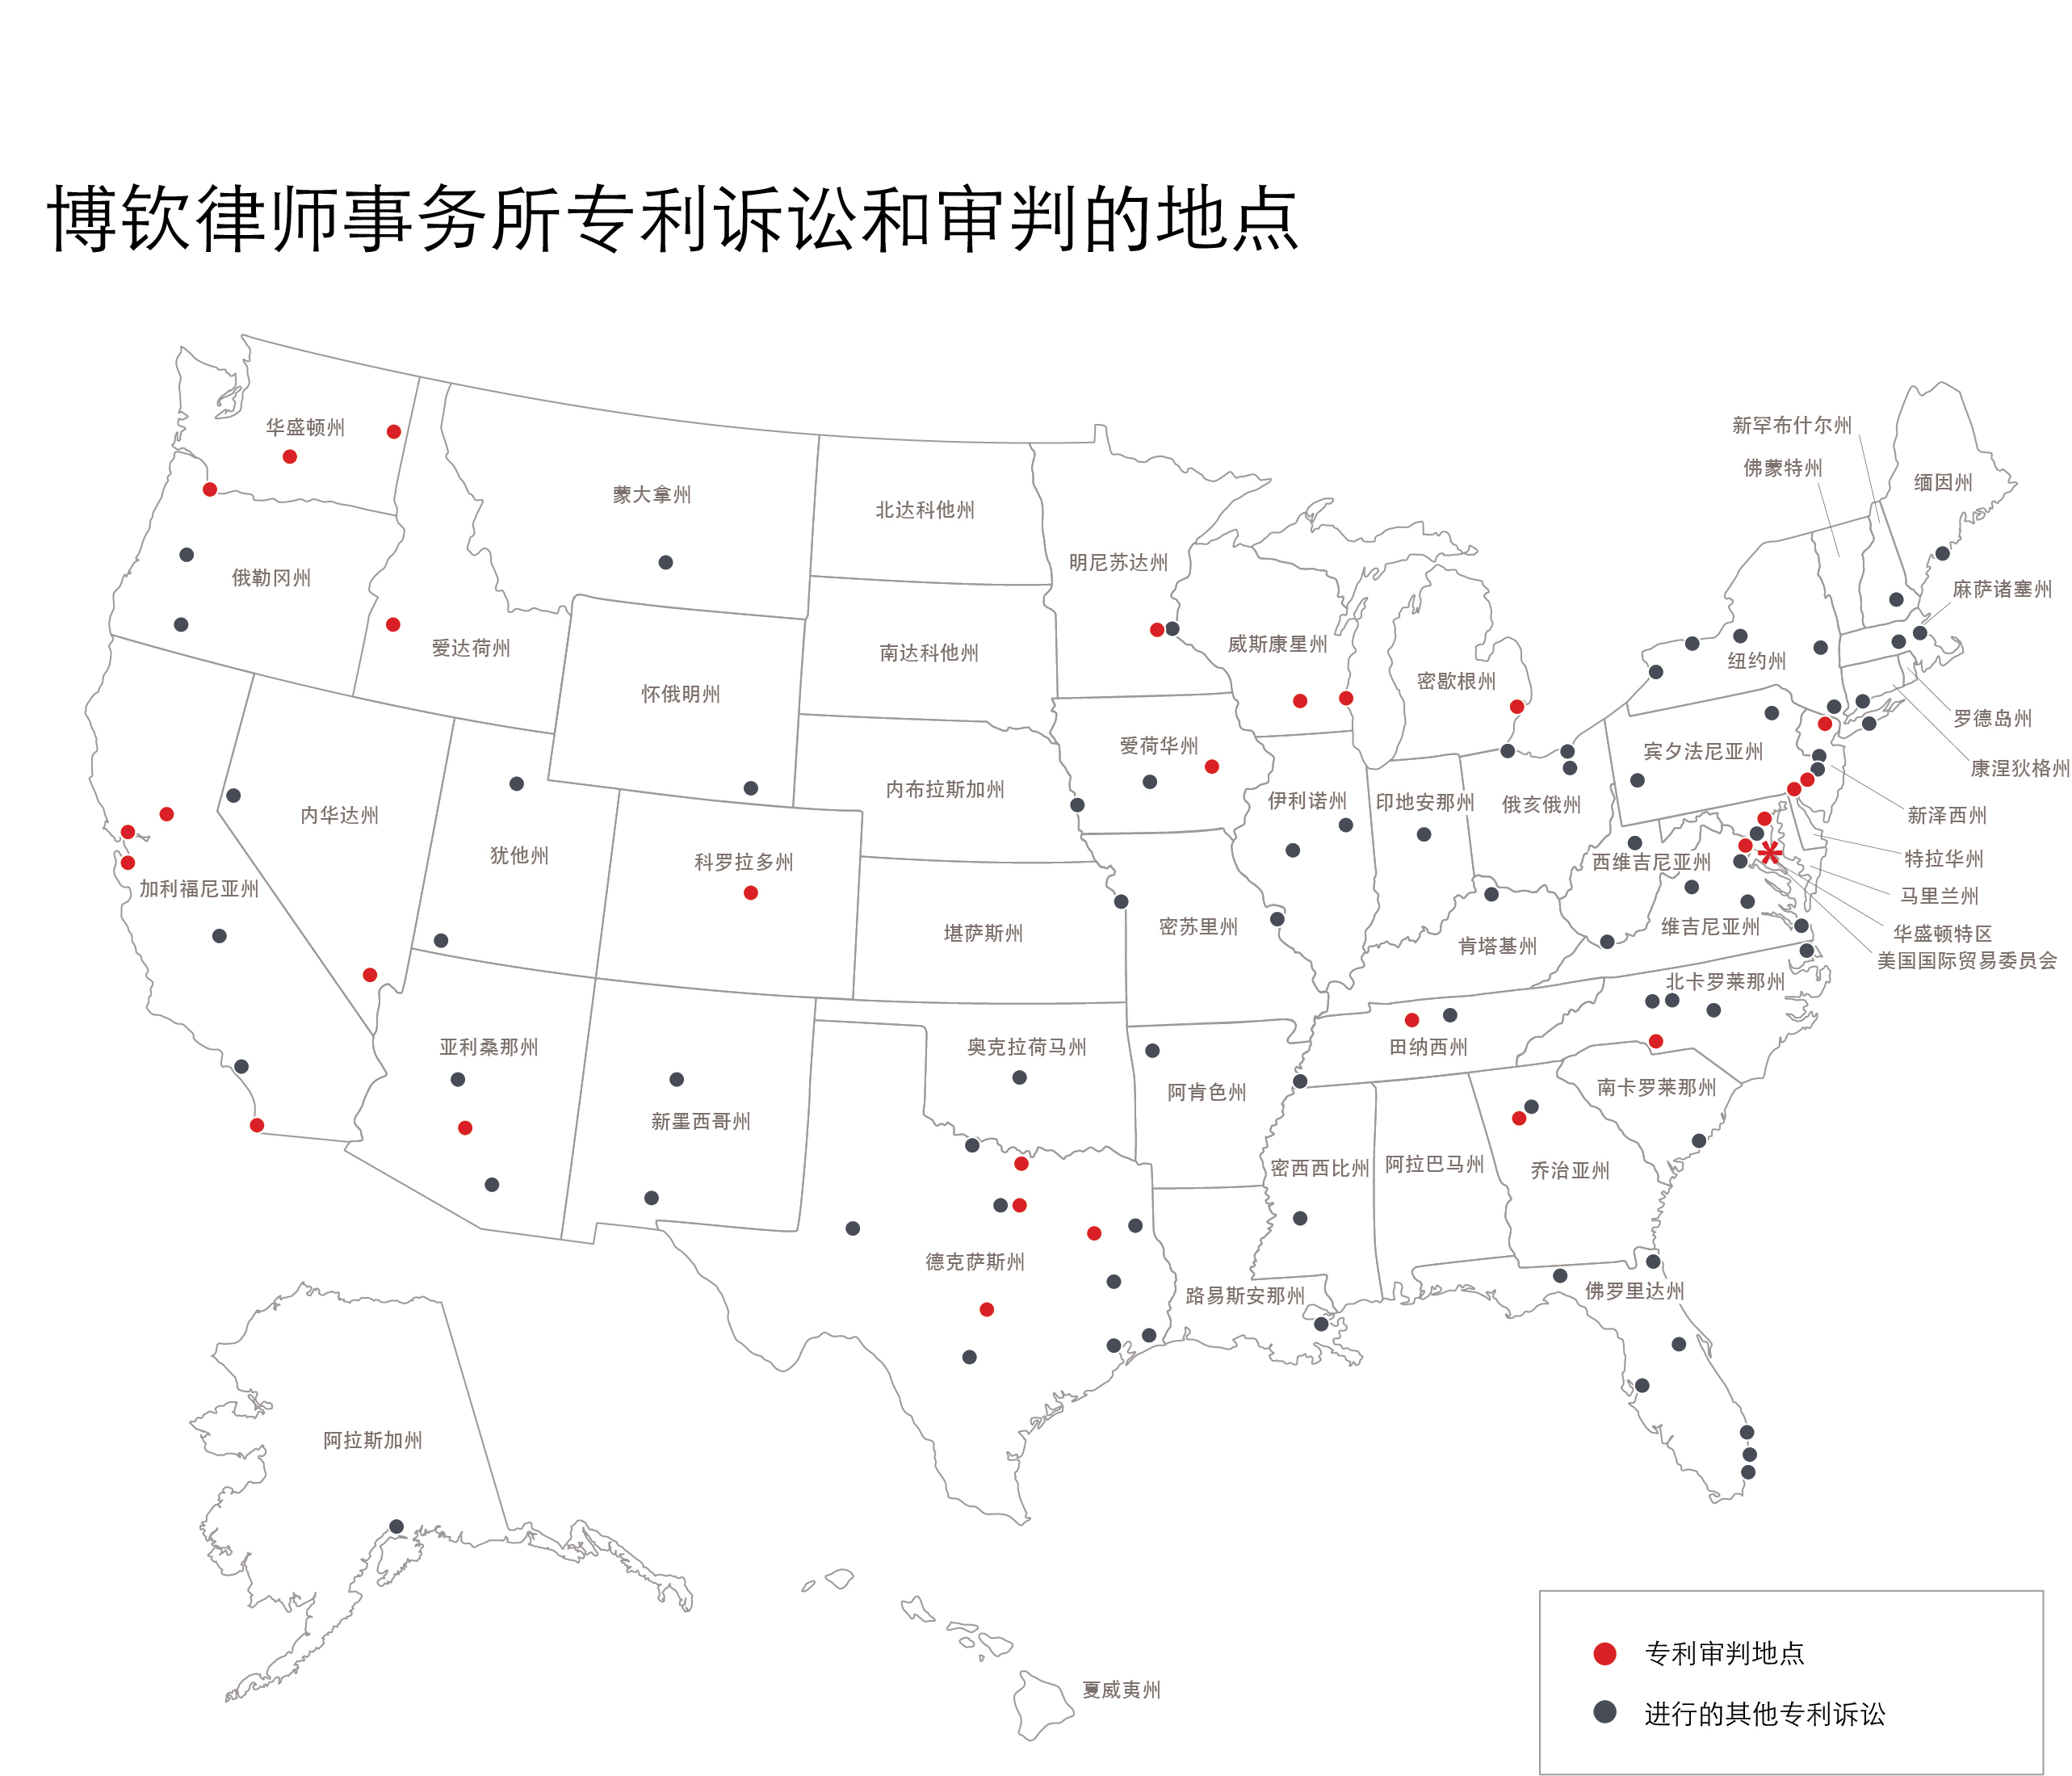 Image of US with locations of Patent Litigation Cases